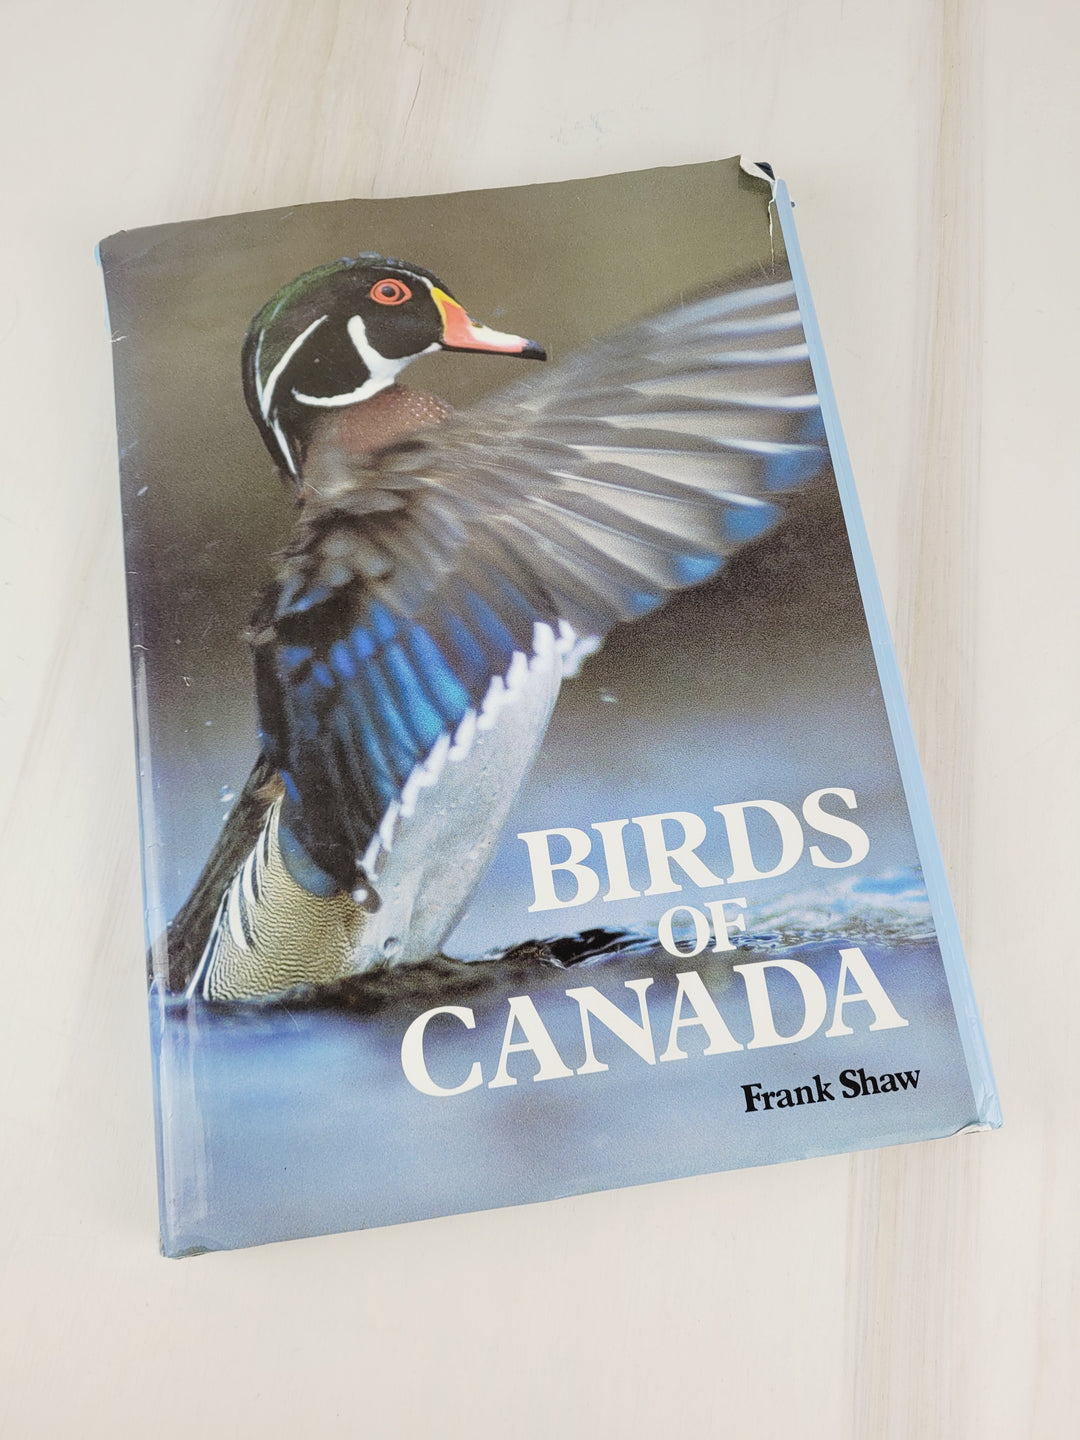 BIRDS OF CANADA LARGE HARDCOVER BOOK BY FRANK SHAW EUC/PC